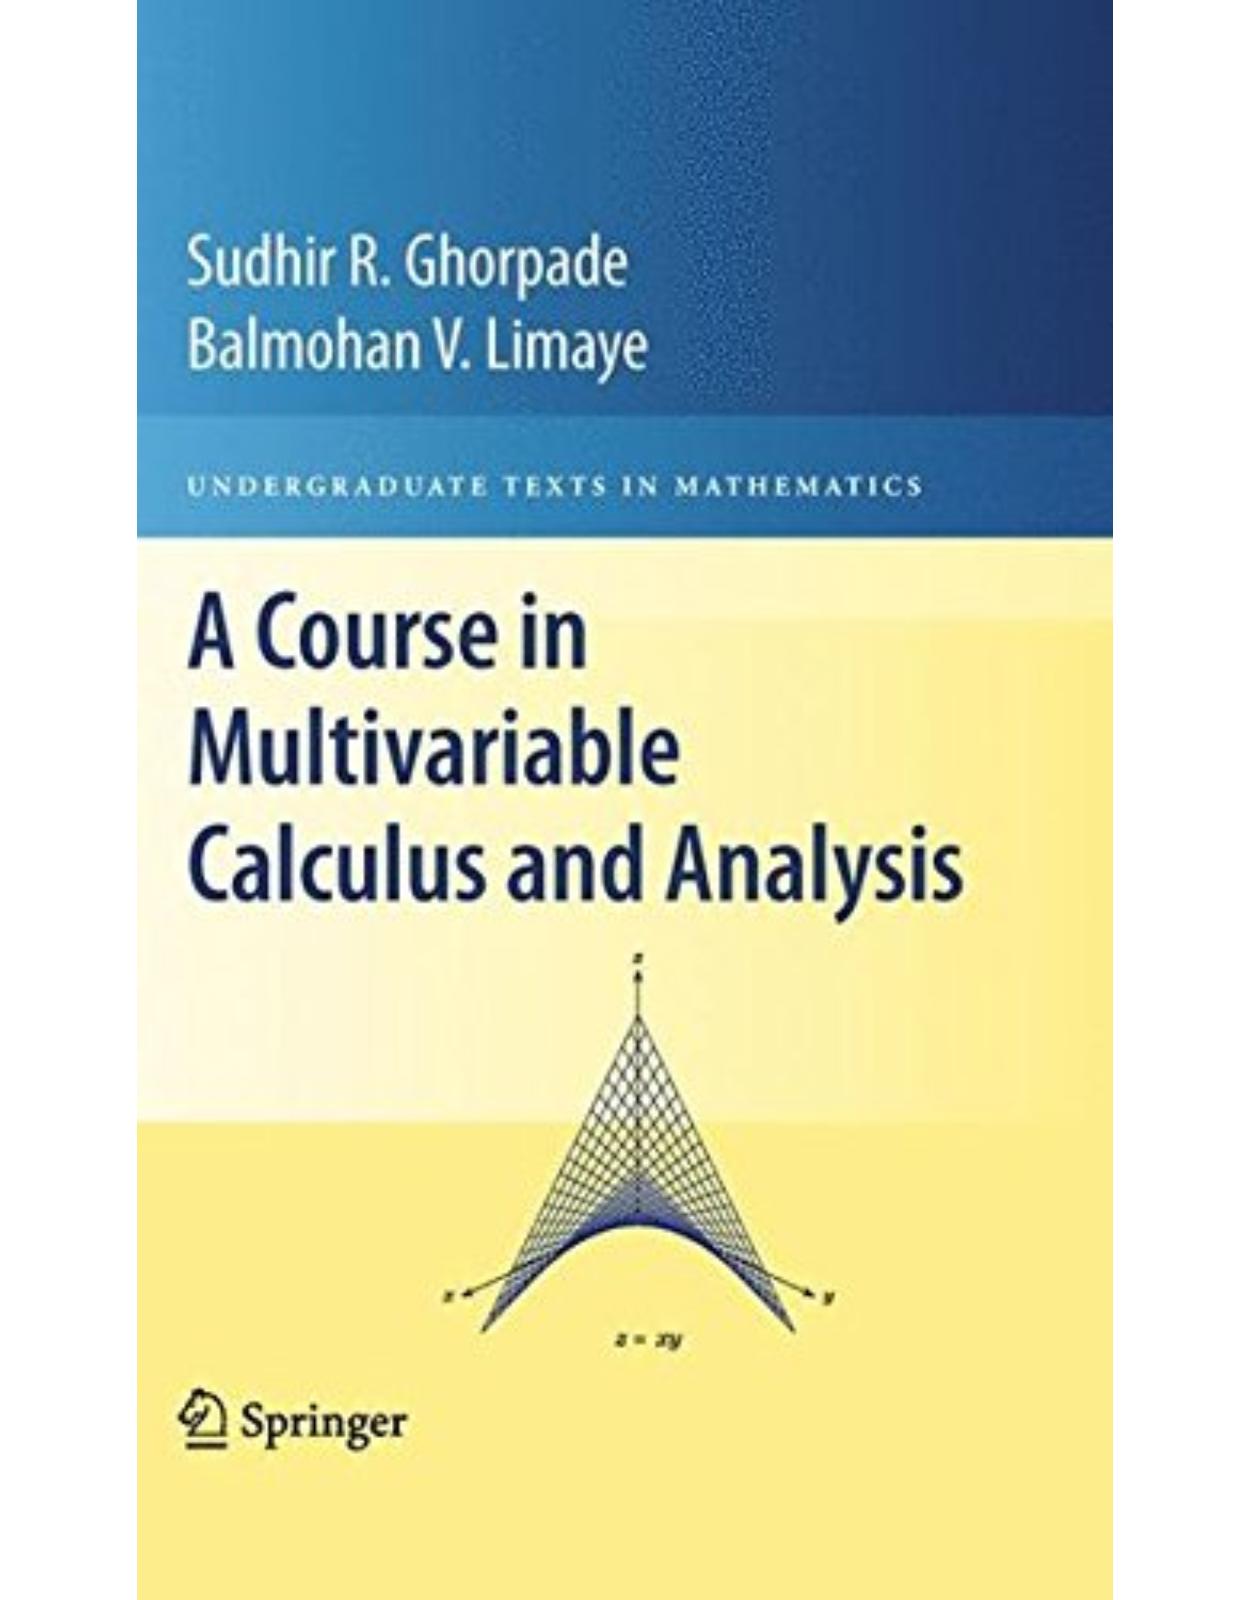 A Course in Multivariable Calculus and Analysis